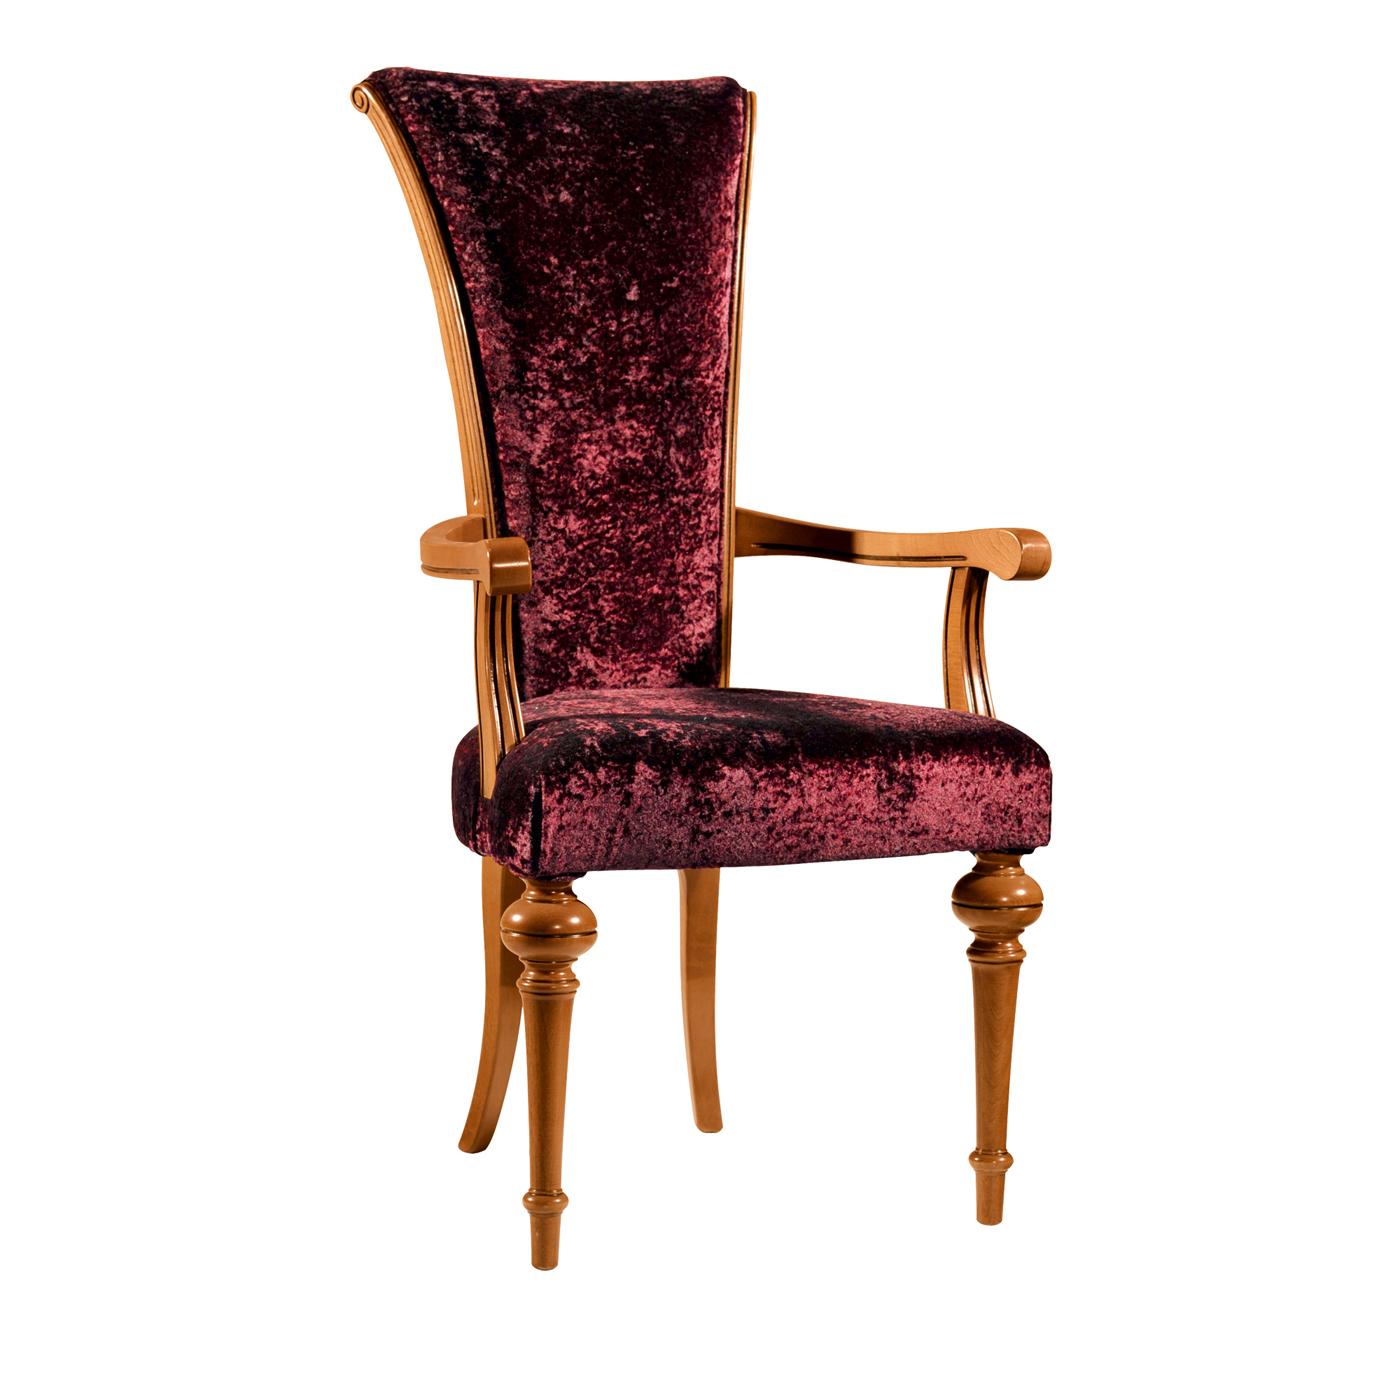 The design of this dining chair with a solid wooden frame, is typically Baroque, characterized by the front legs elegantly tapered (trumpet-turned legs). The seat and back are padded and upholstered in a red velvet fabric, that gives this